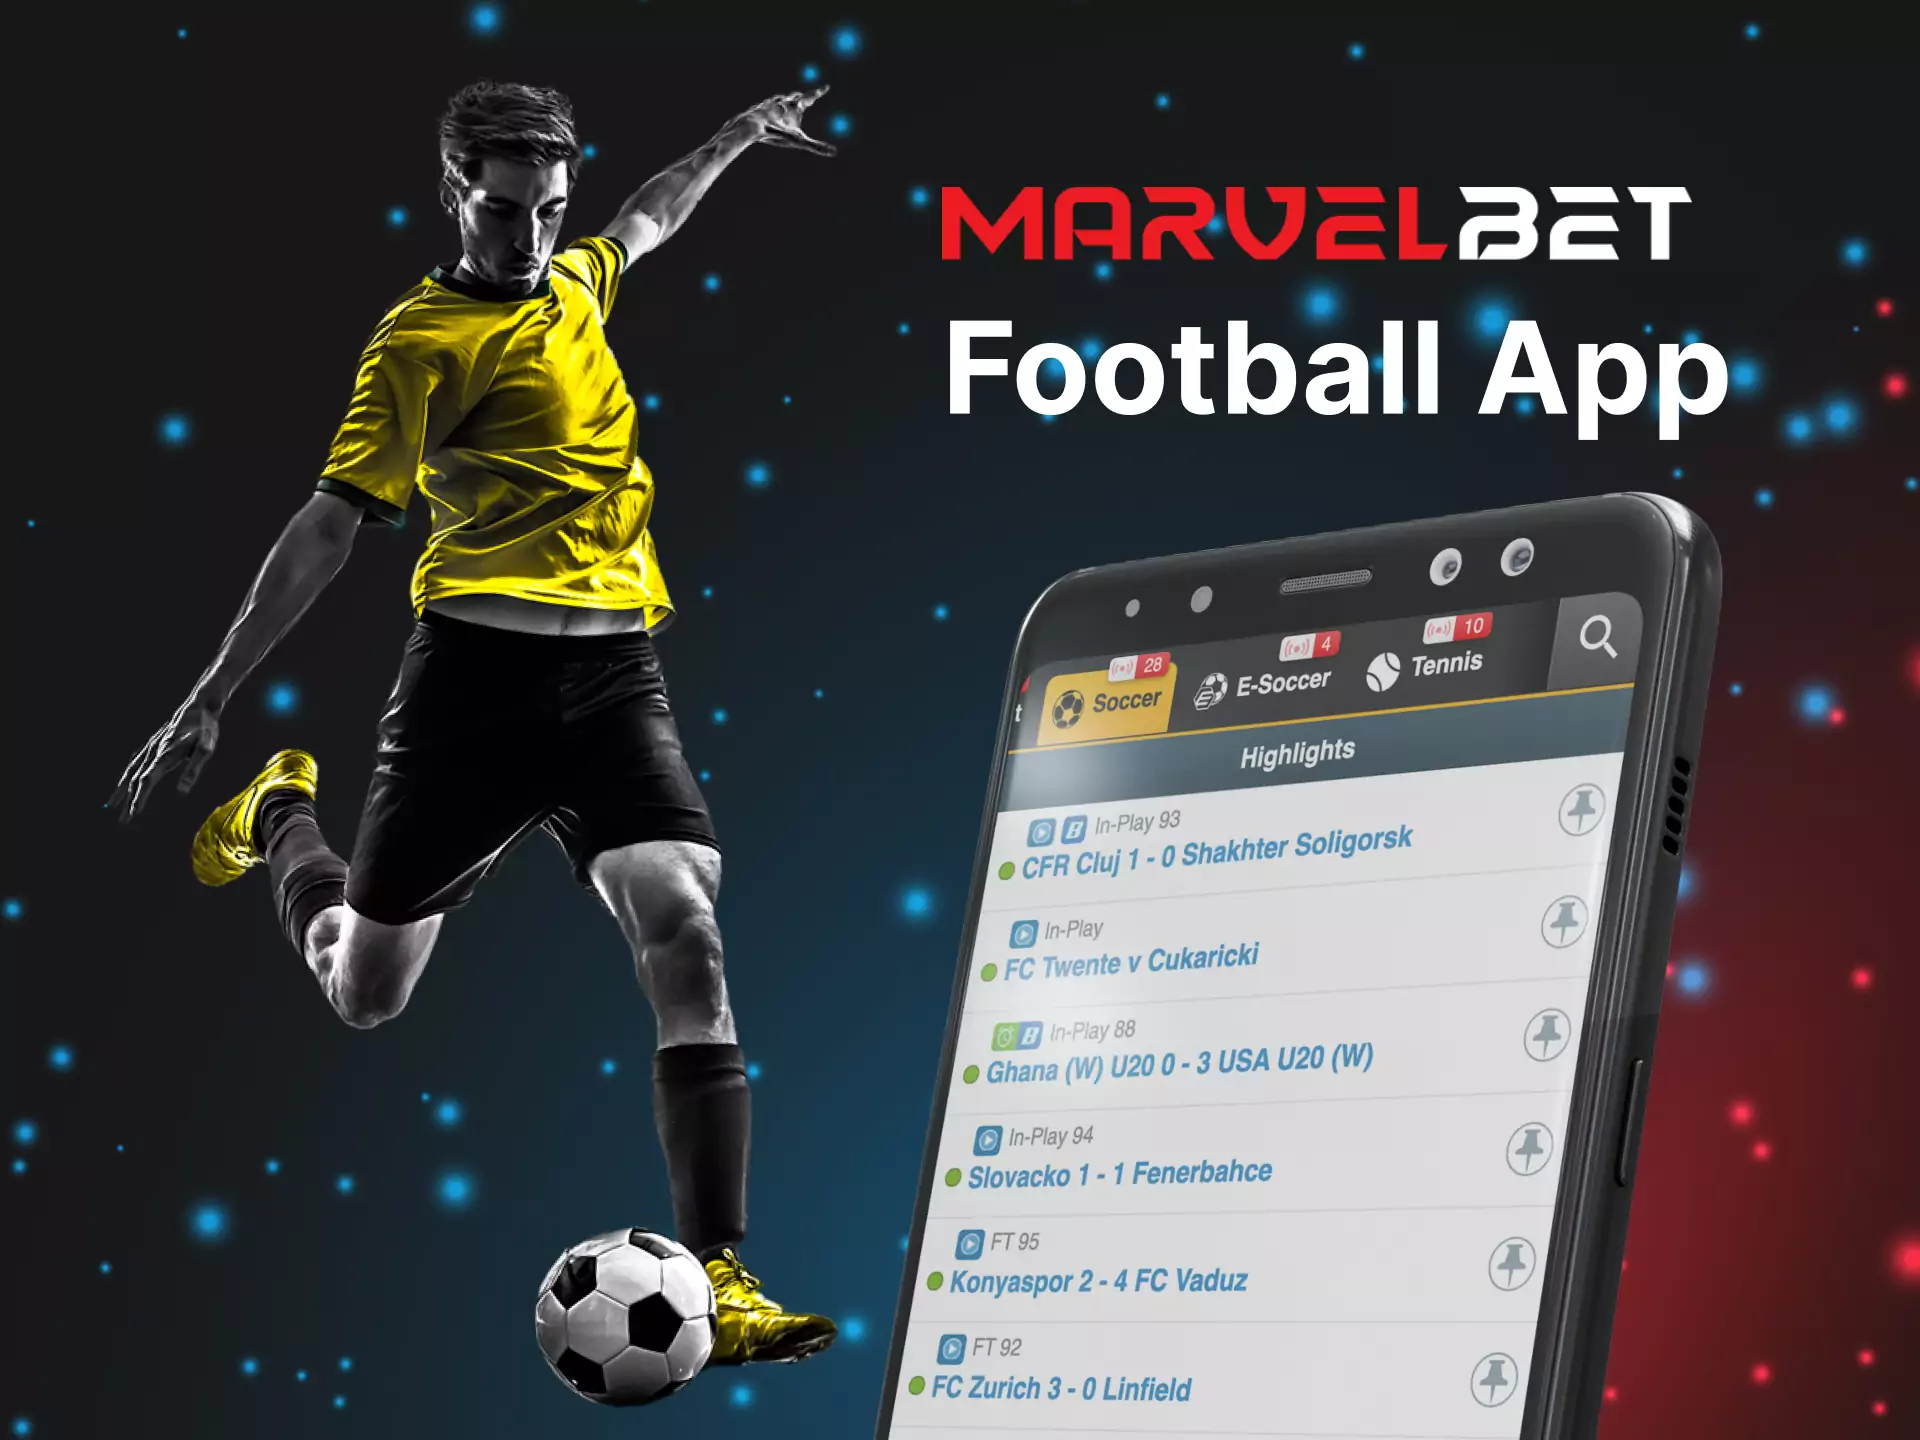 Football is widely presented in the Marvelbet sportsbook.